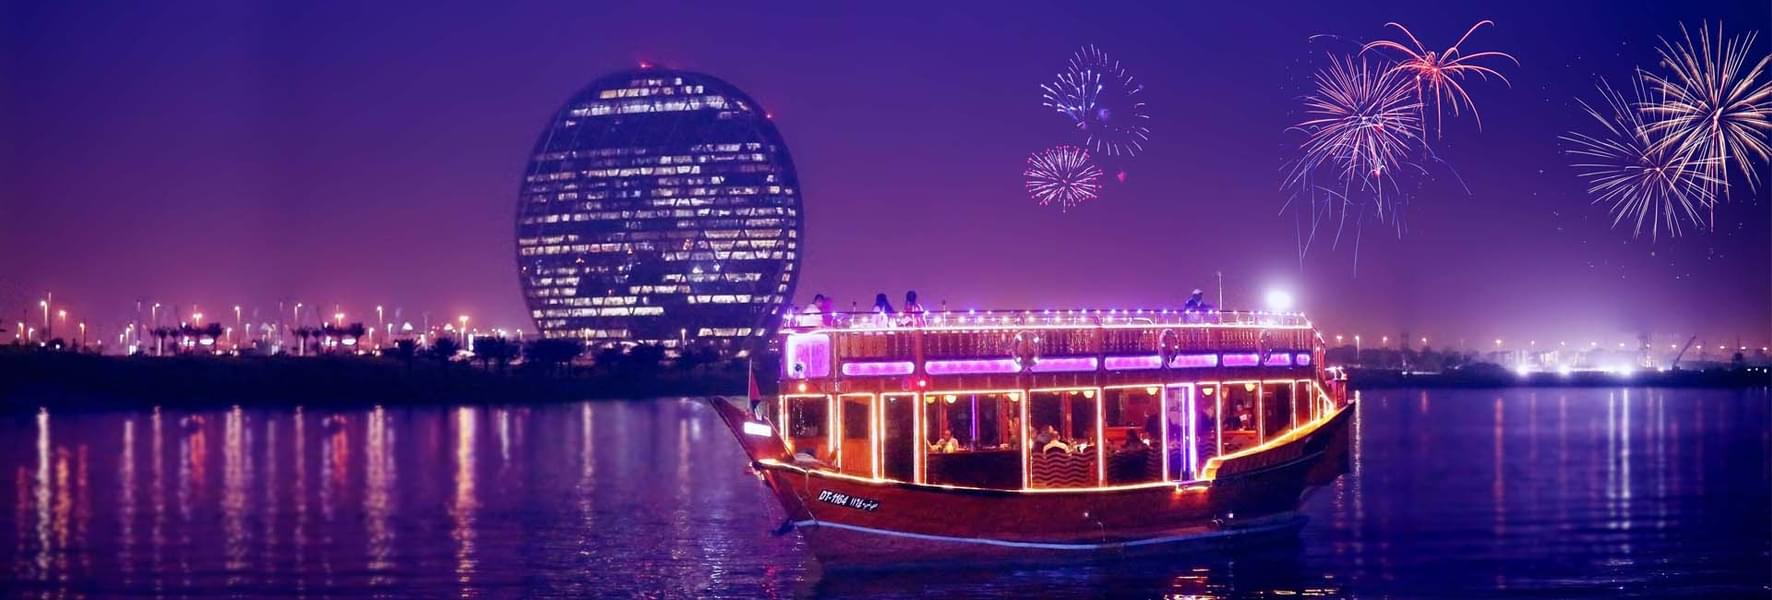 Experience a romantic setting under the stars as you dine on our enchanting Dhow boat